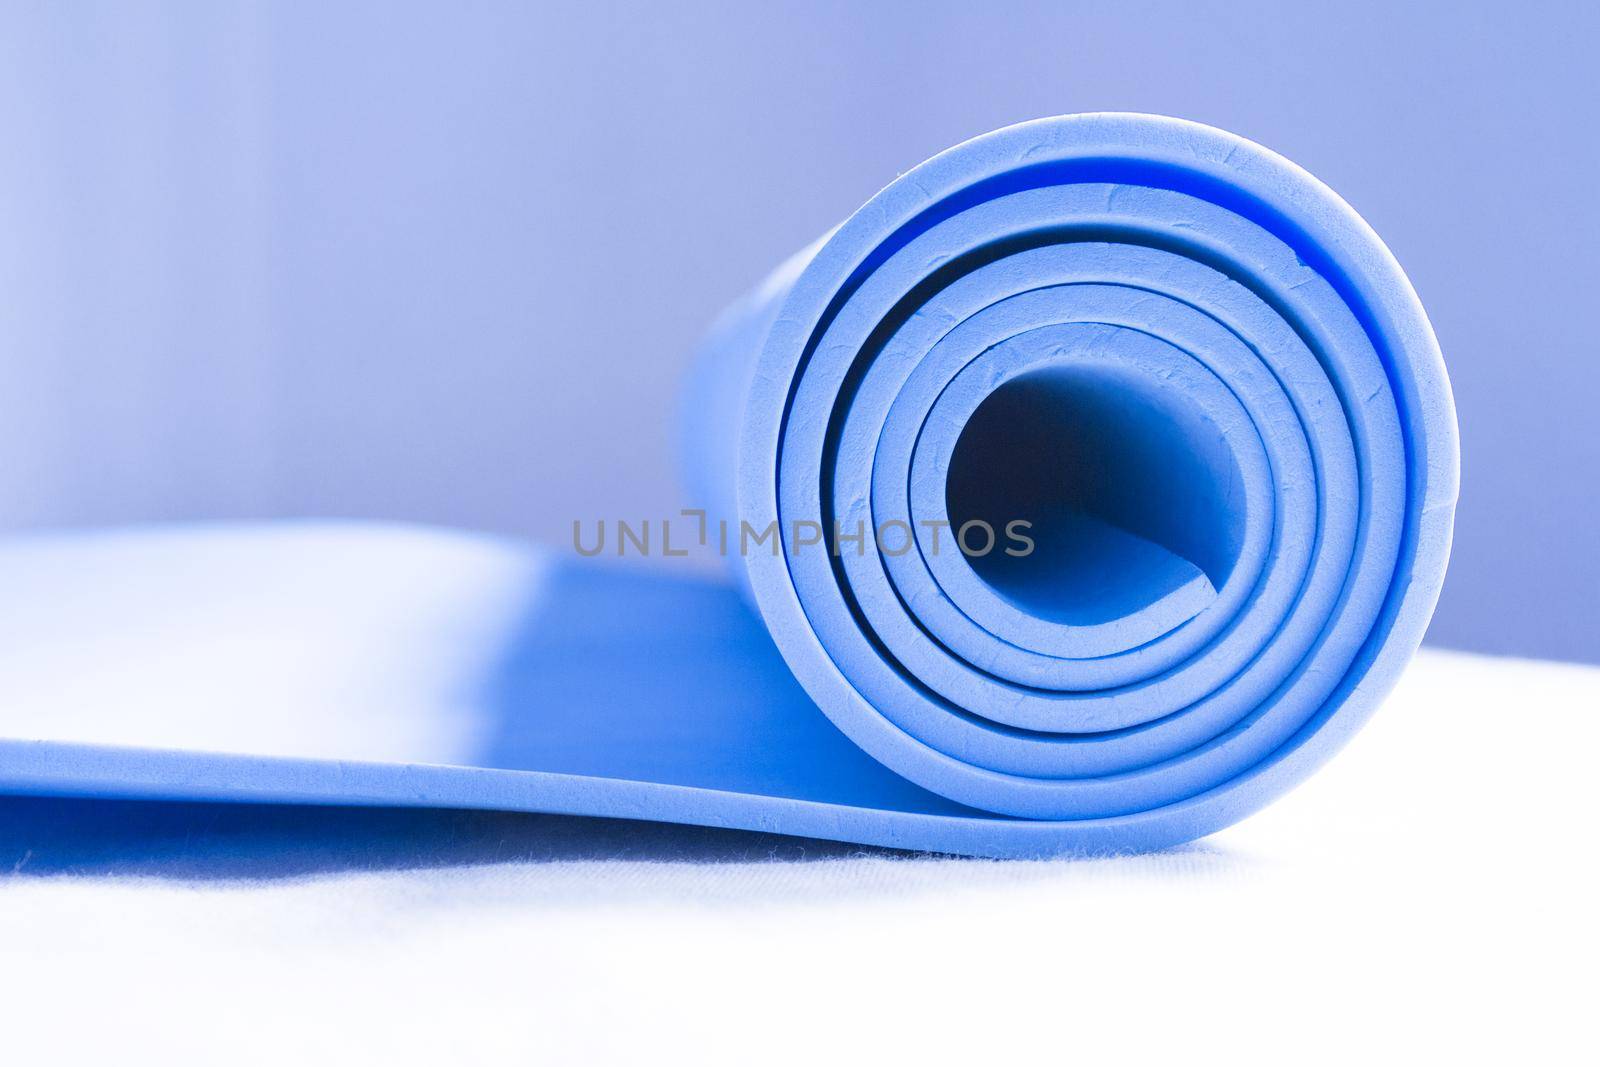 Mat for practicing yoga, pilates and stretching exercises. No people